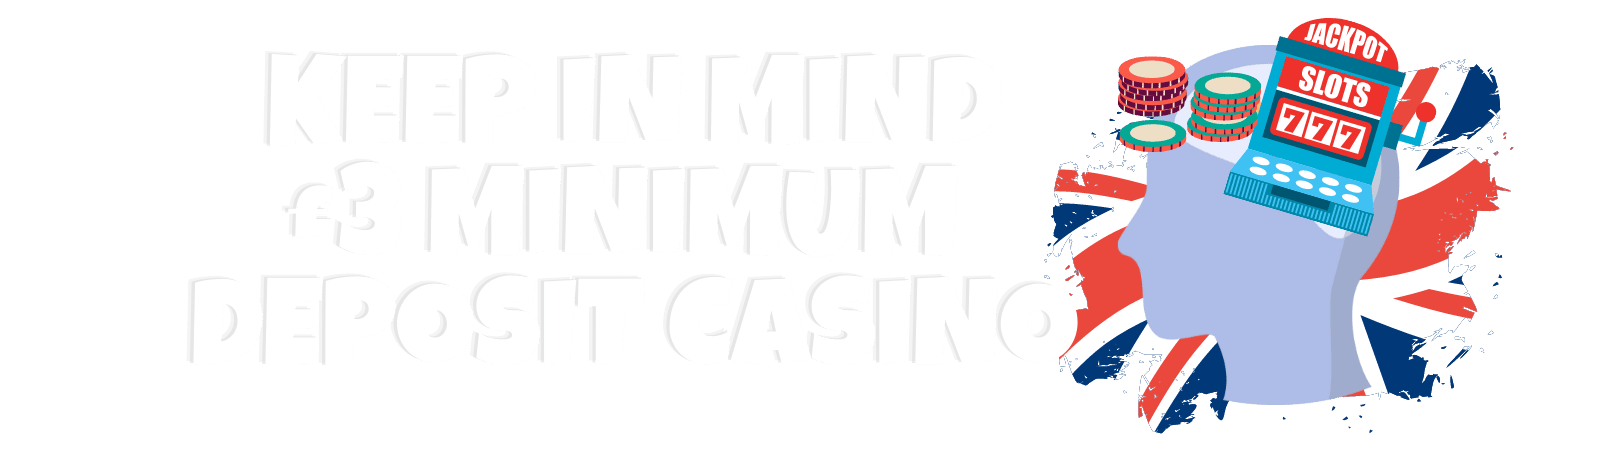 Things to Keep in Mind when Joining £3 Minimum Deposit Casino img